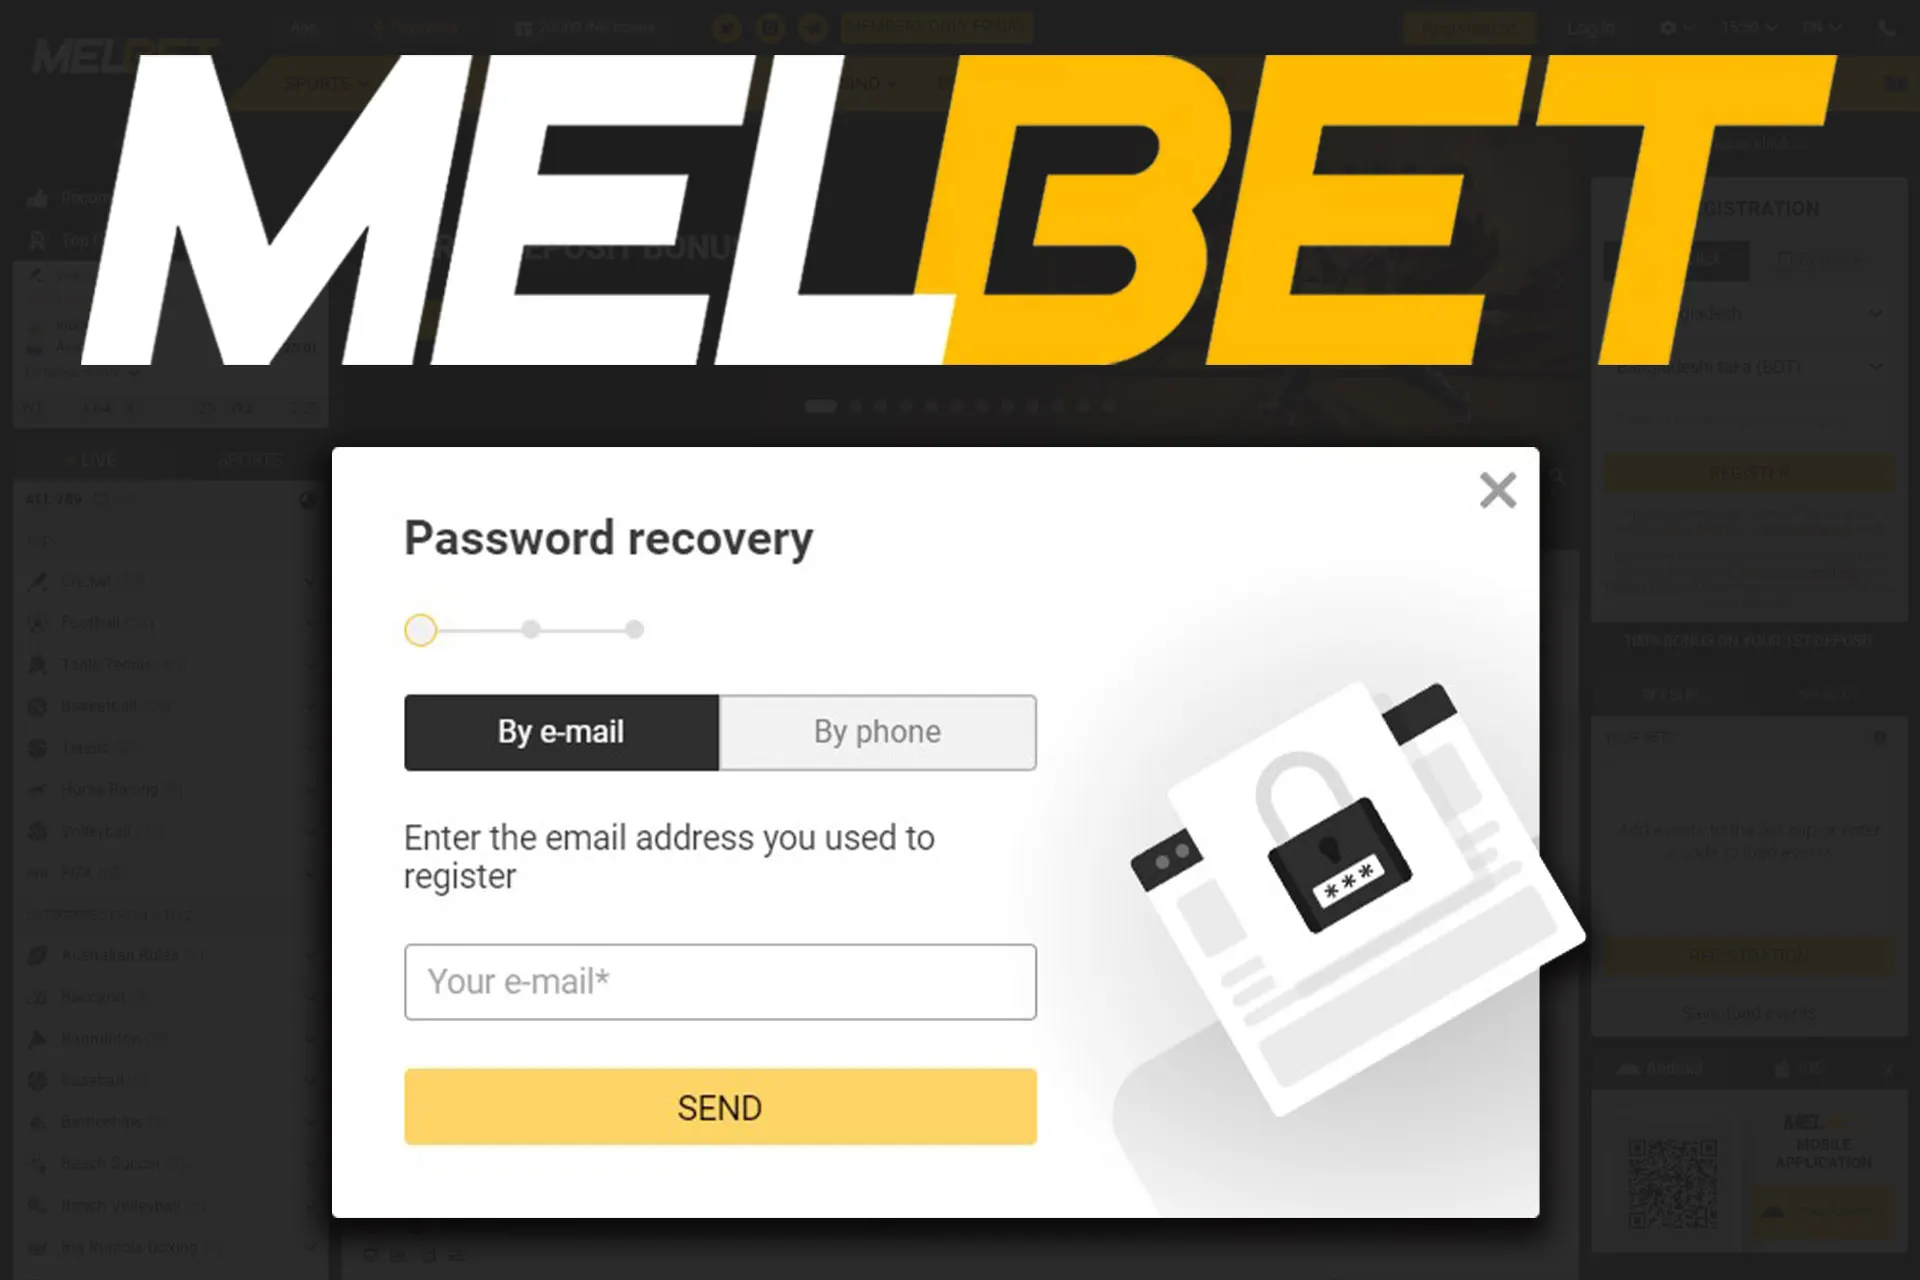 Recover Melbet account with your email.